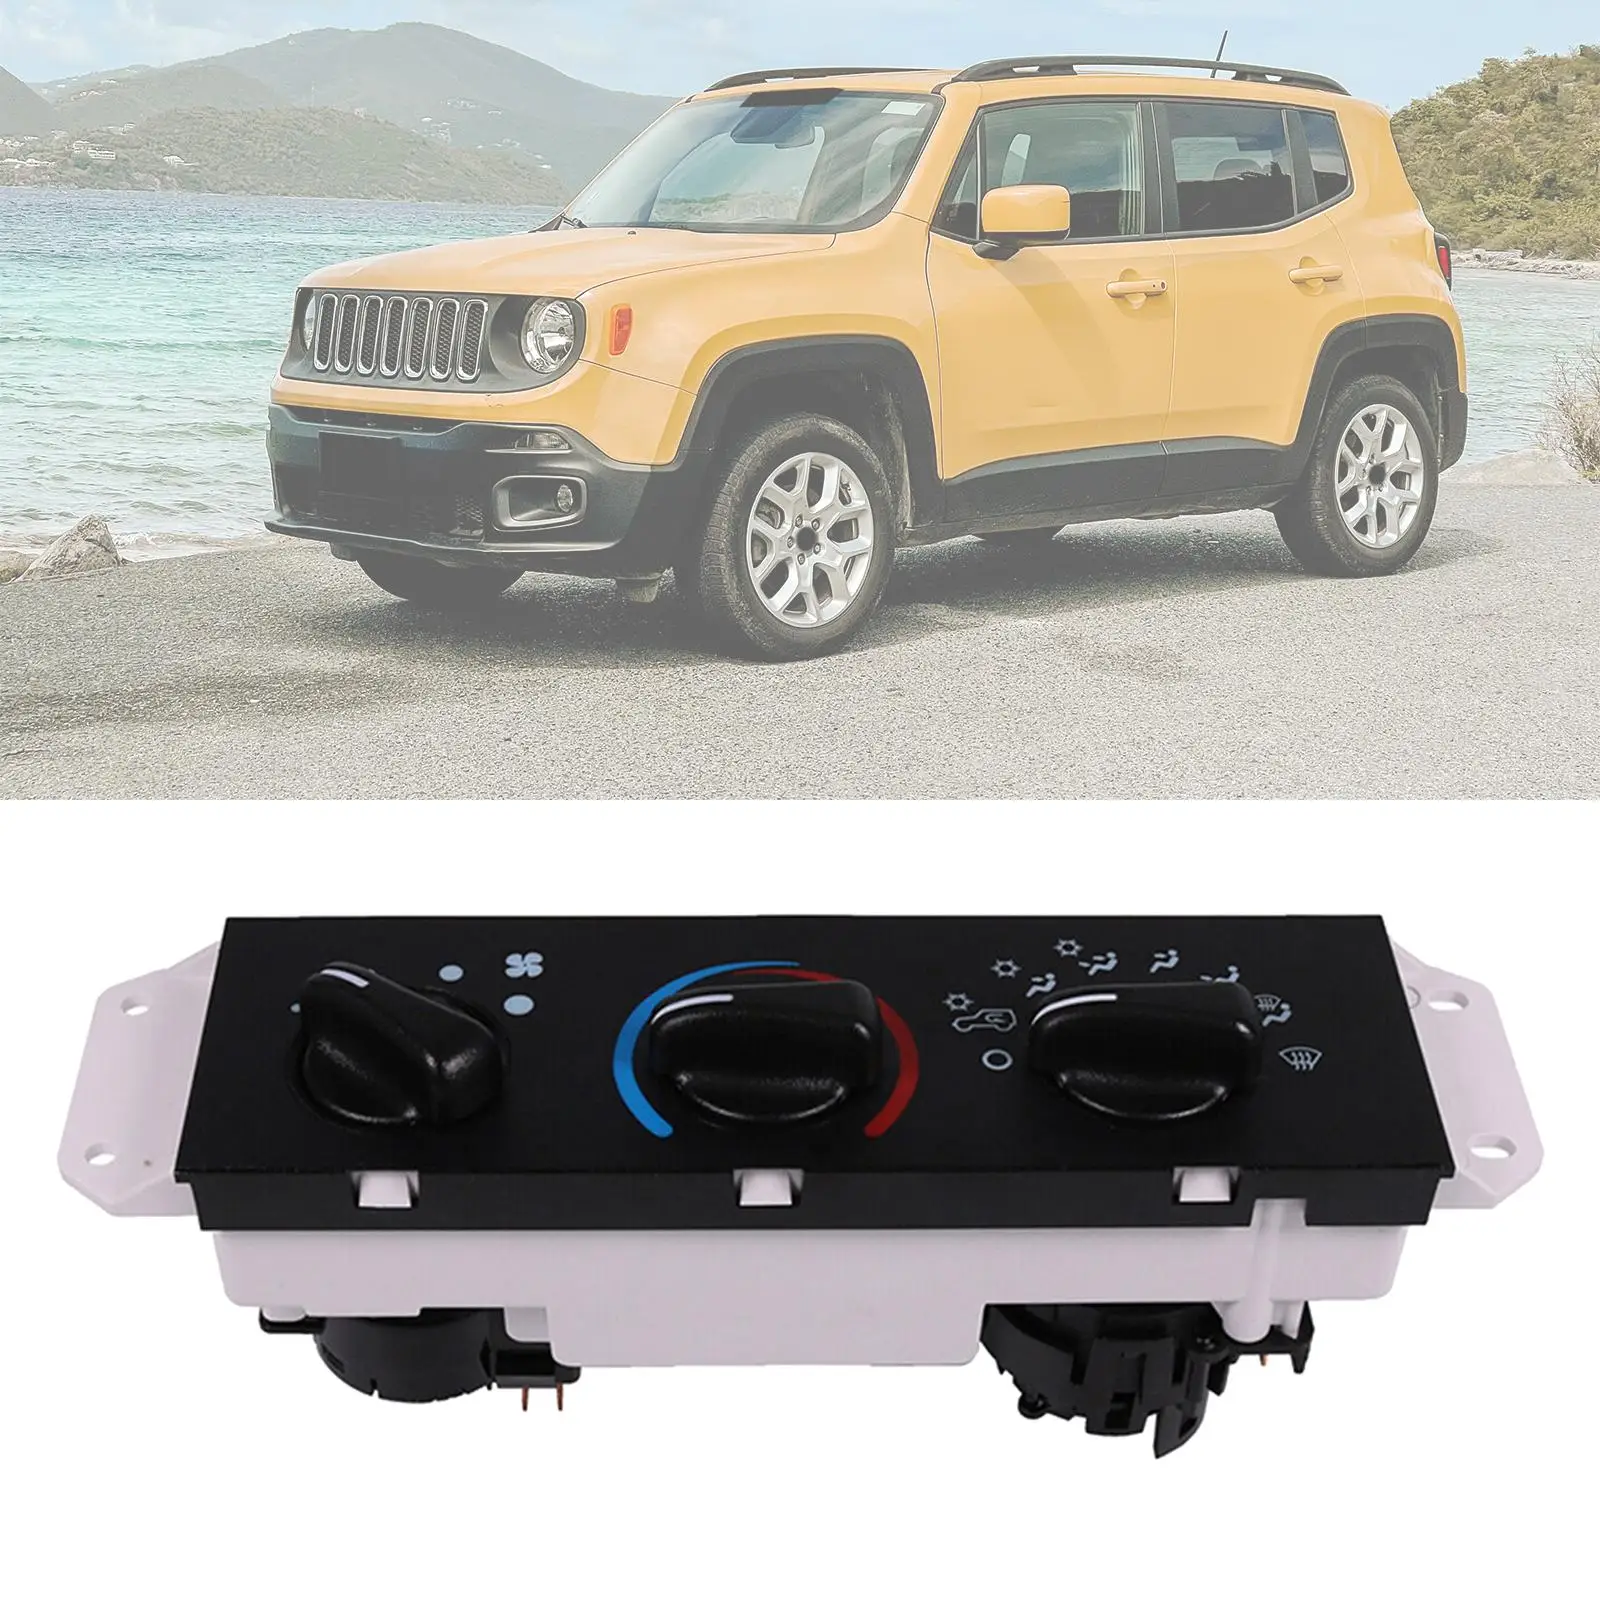 AC Heater Climate Control Unit Replacement Parts for Jeep Wrangler